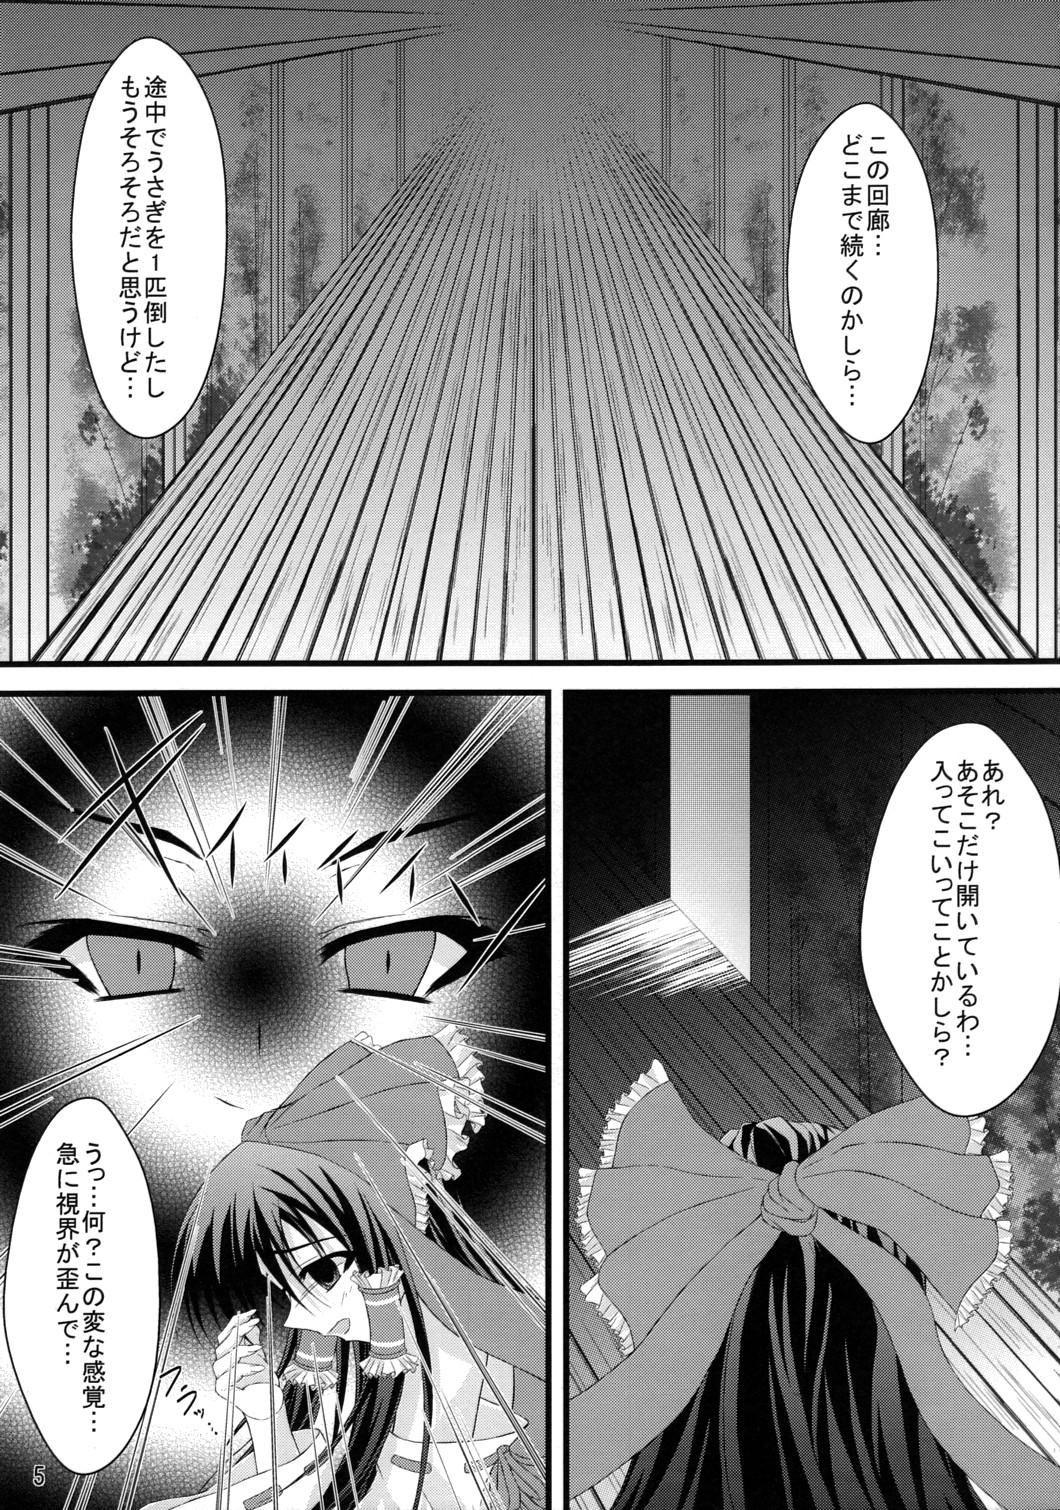 Shoplifter Tele-Mesmerism - Touhou project Groping - Page 4